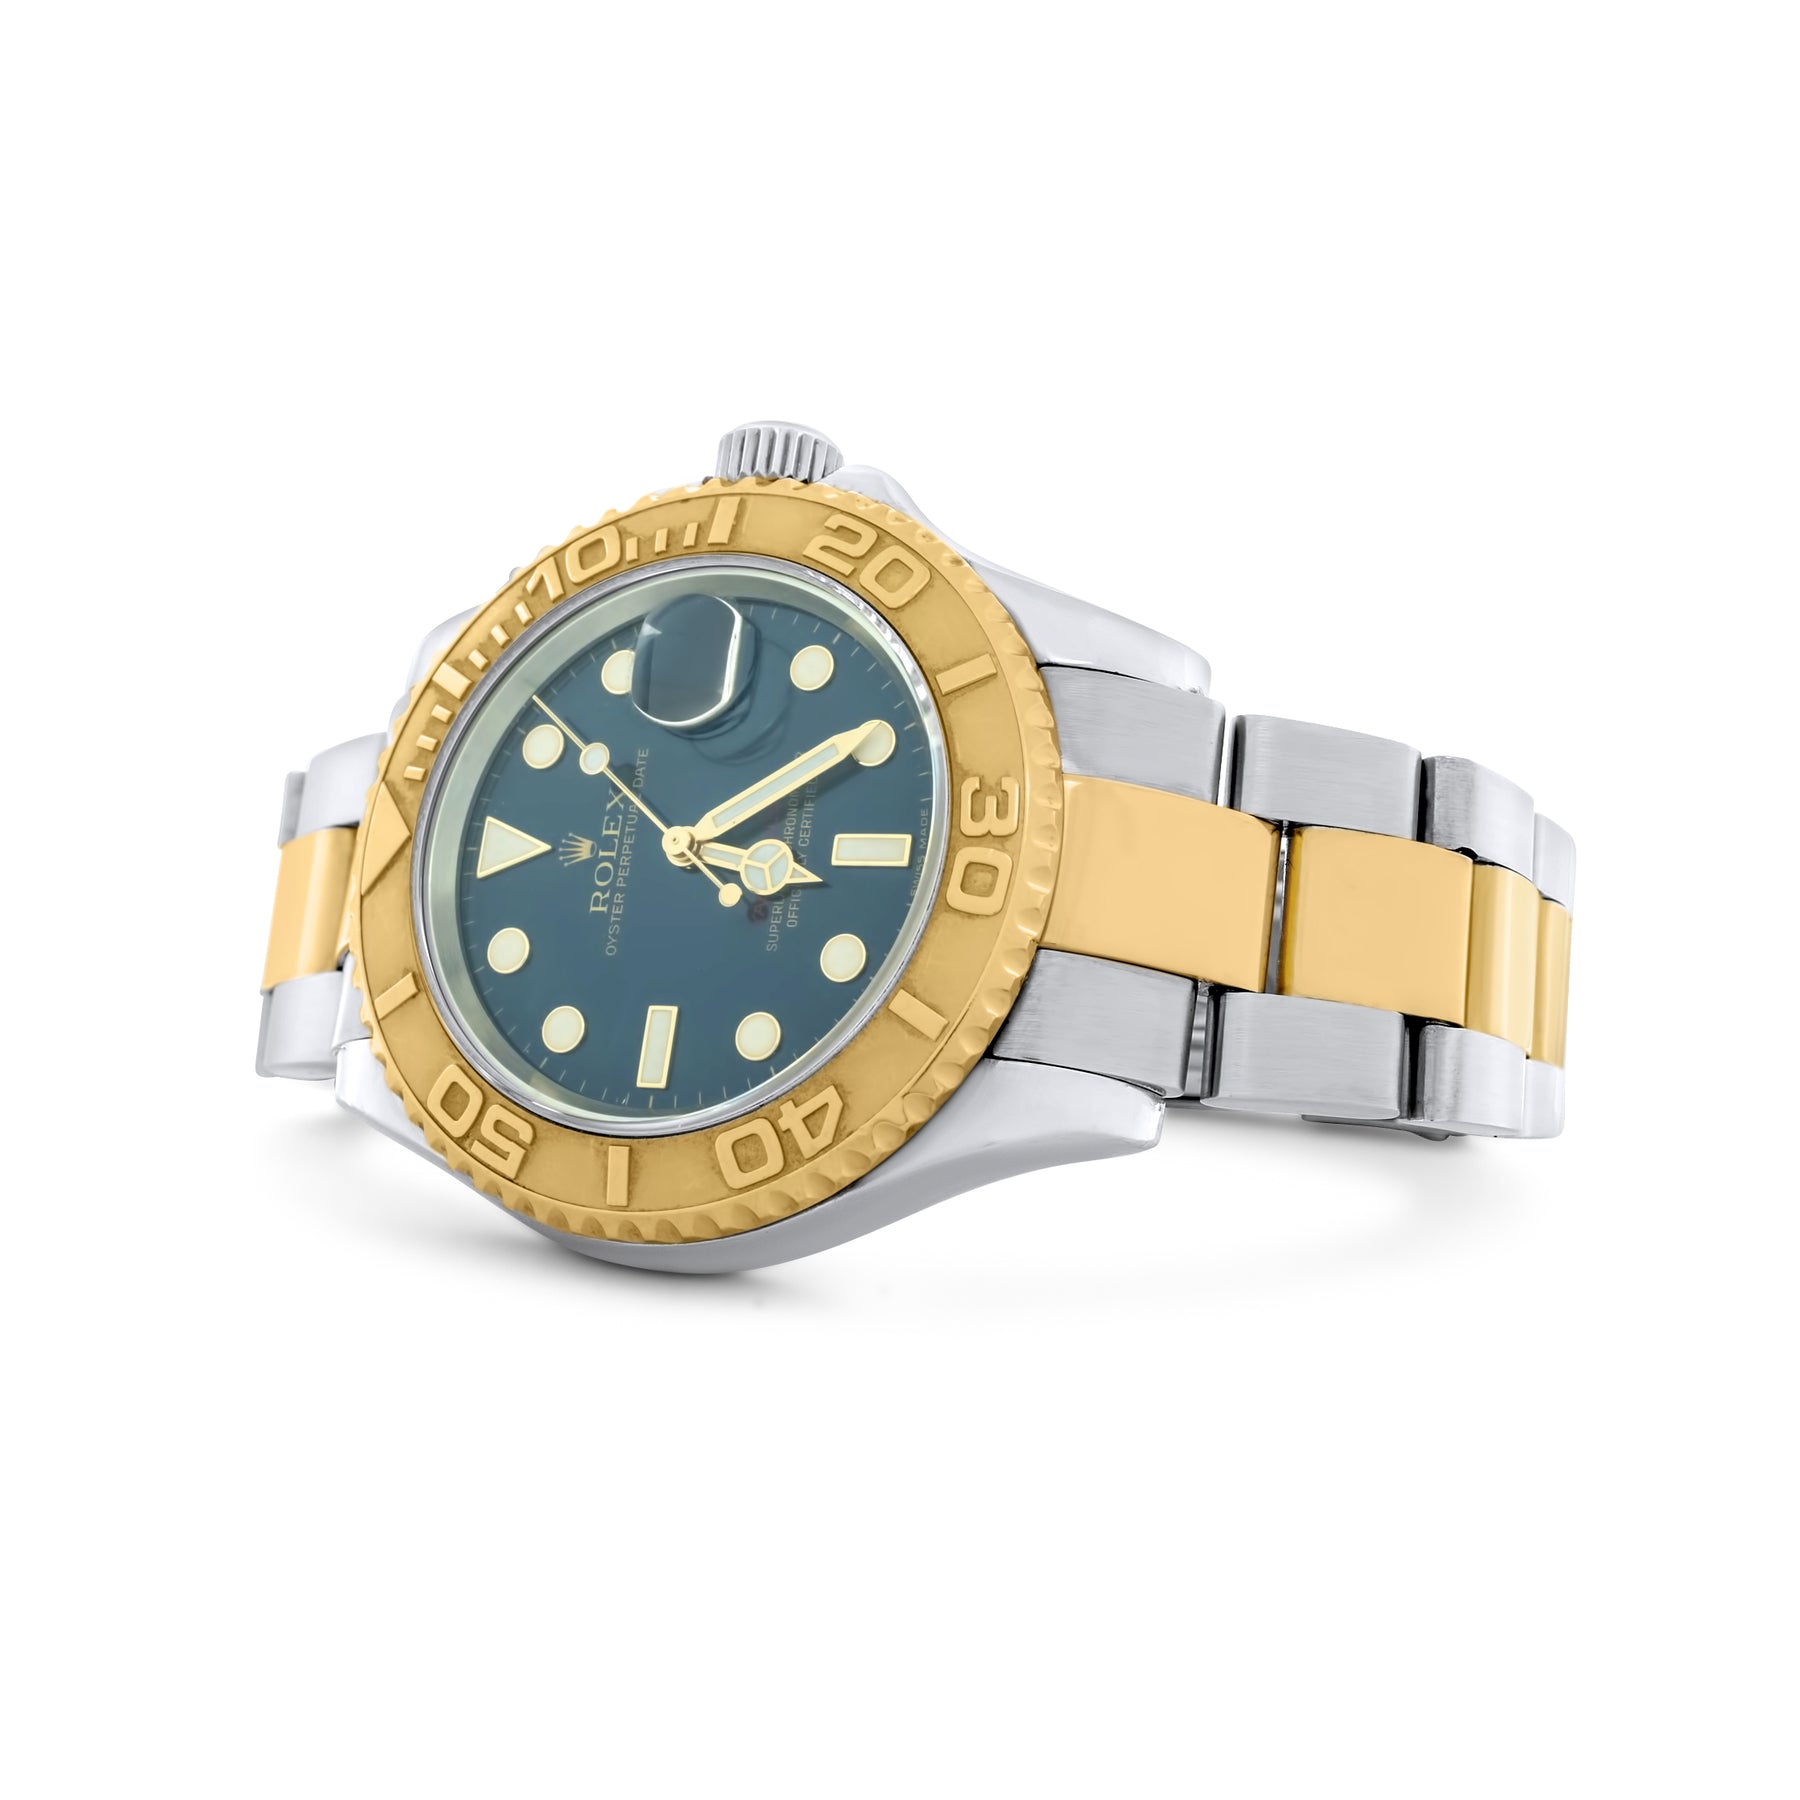 Rolex Yacht-Master 16623 Two Tone Blue Dial Luxury Watch Review